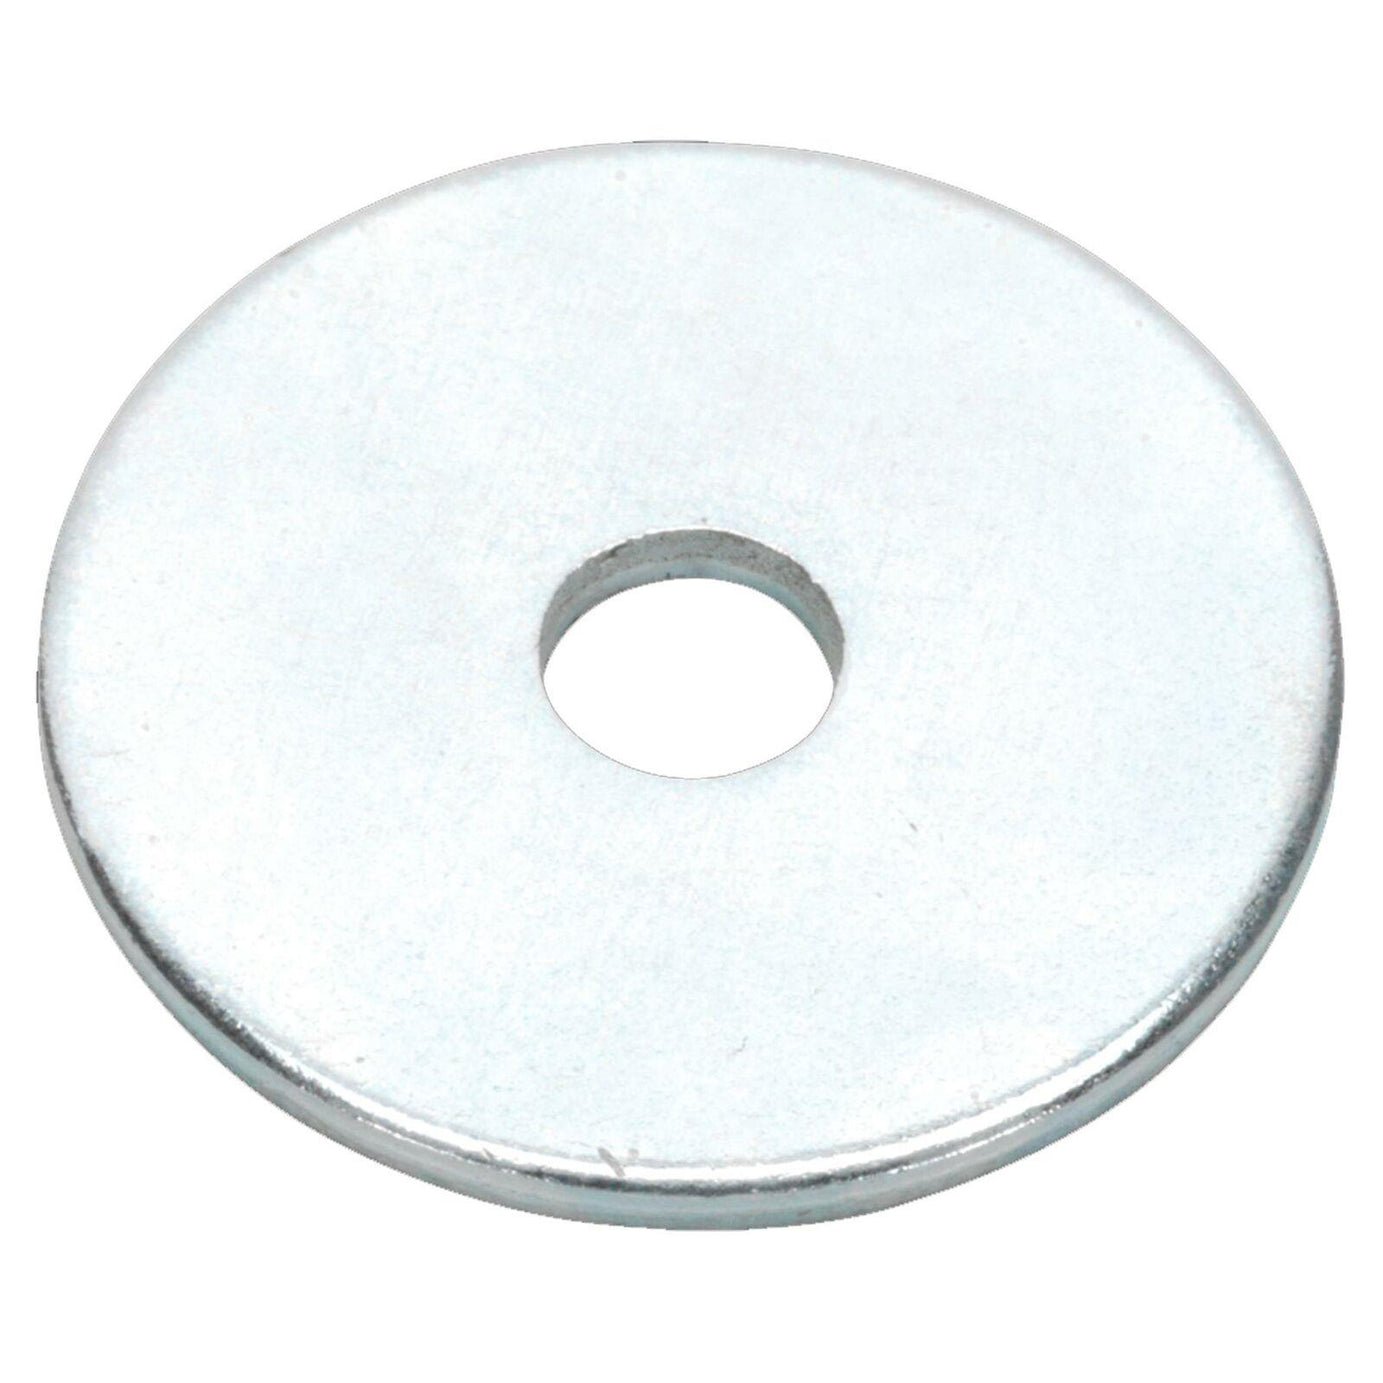 Sealey Repair Washer M8 x 38mm Zinc Plated Pack of 50